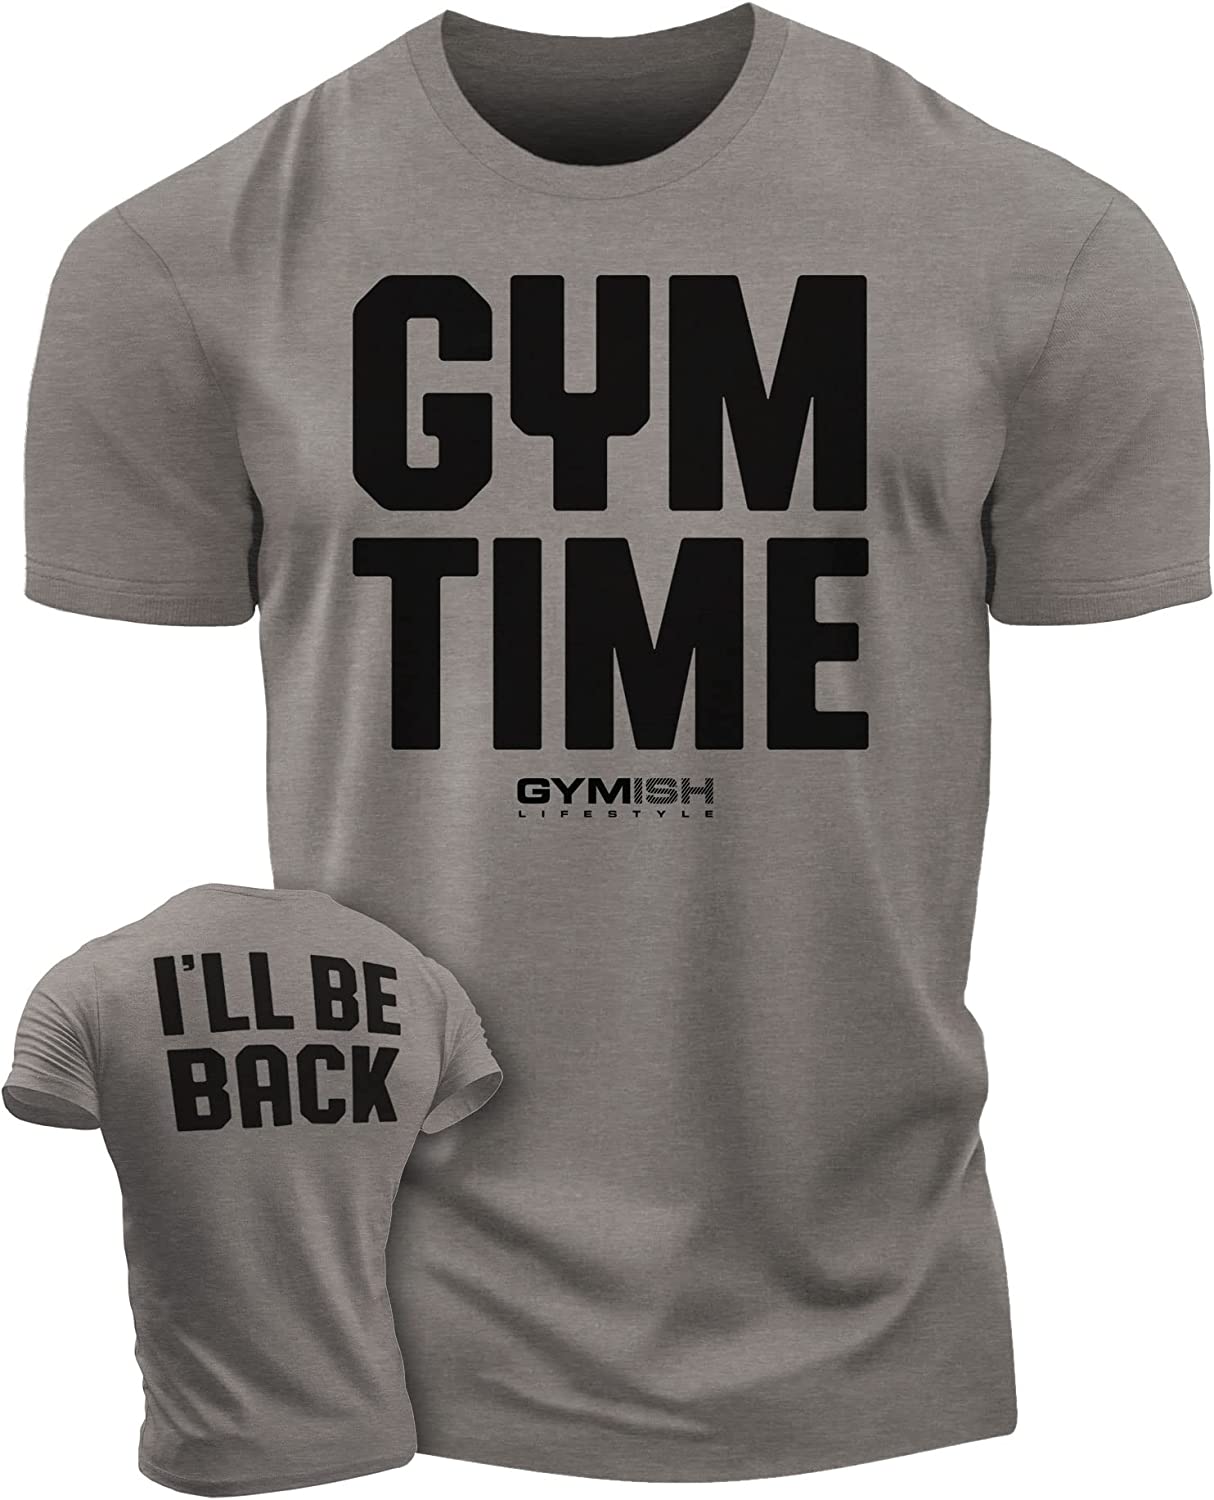 019. GYM TIME - I'll BE BACK Workout T-Shirt